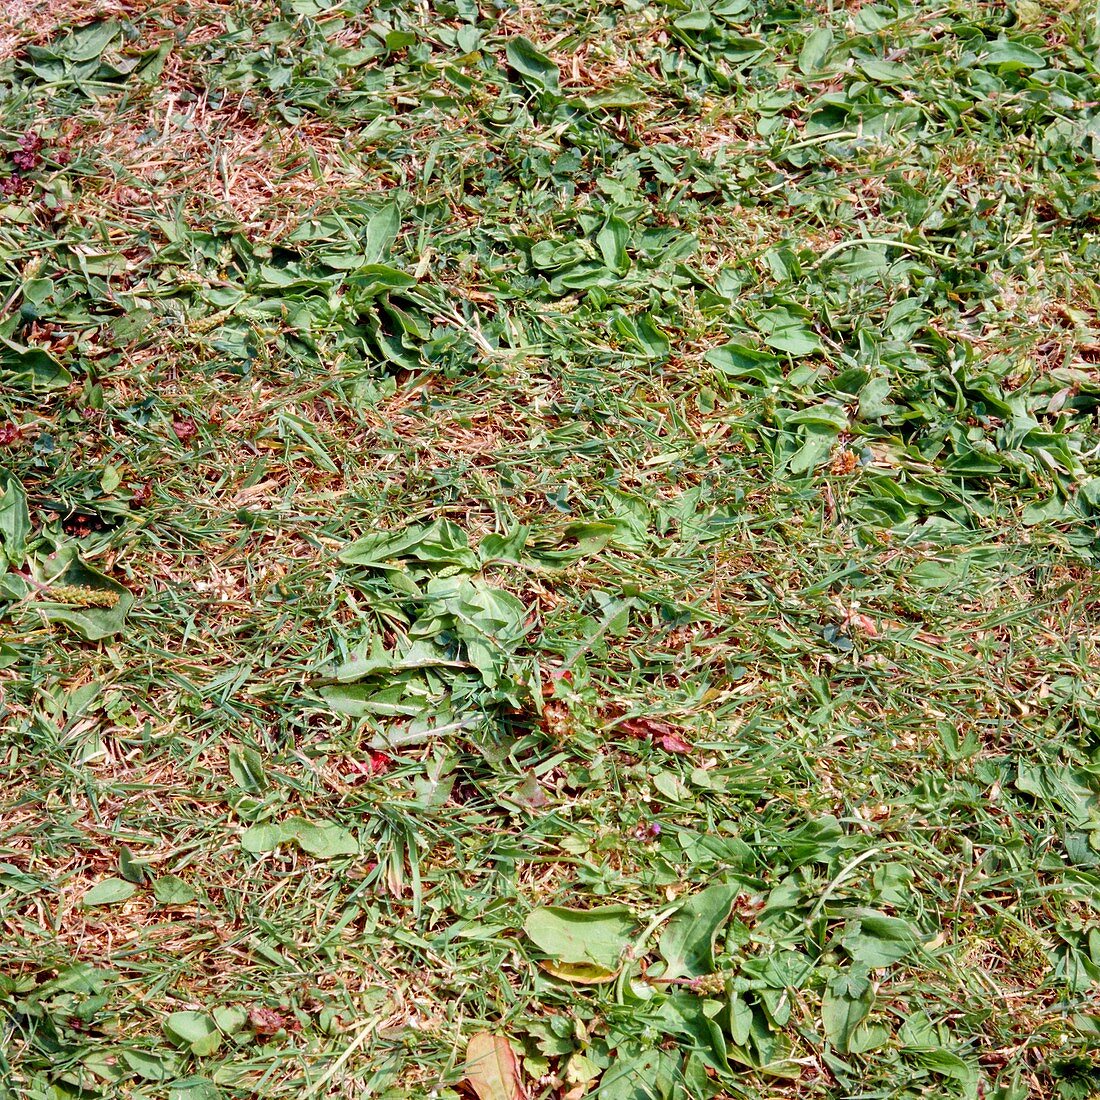 Weeds in a lawn